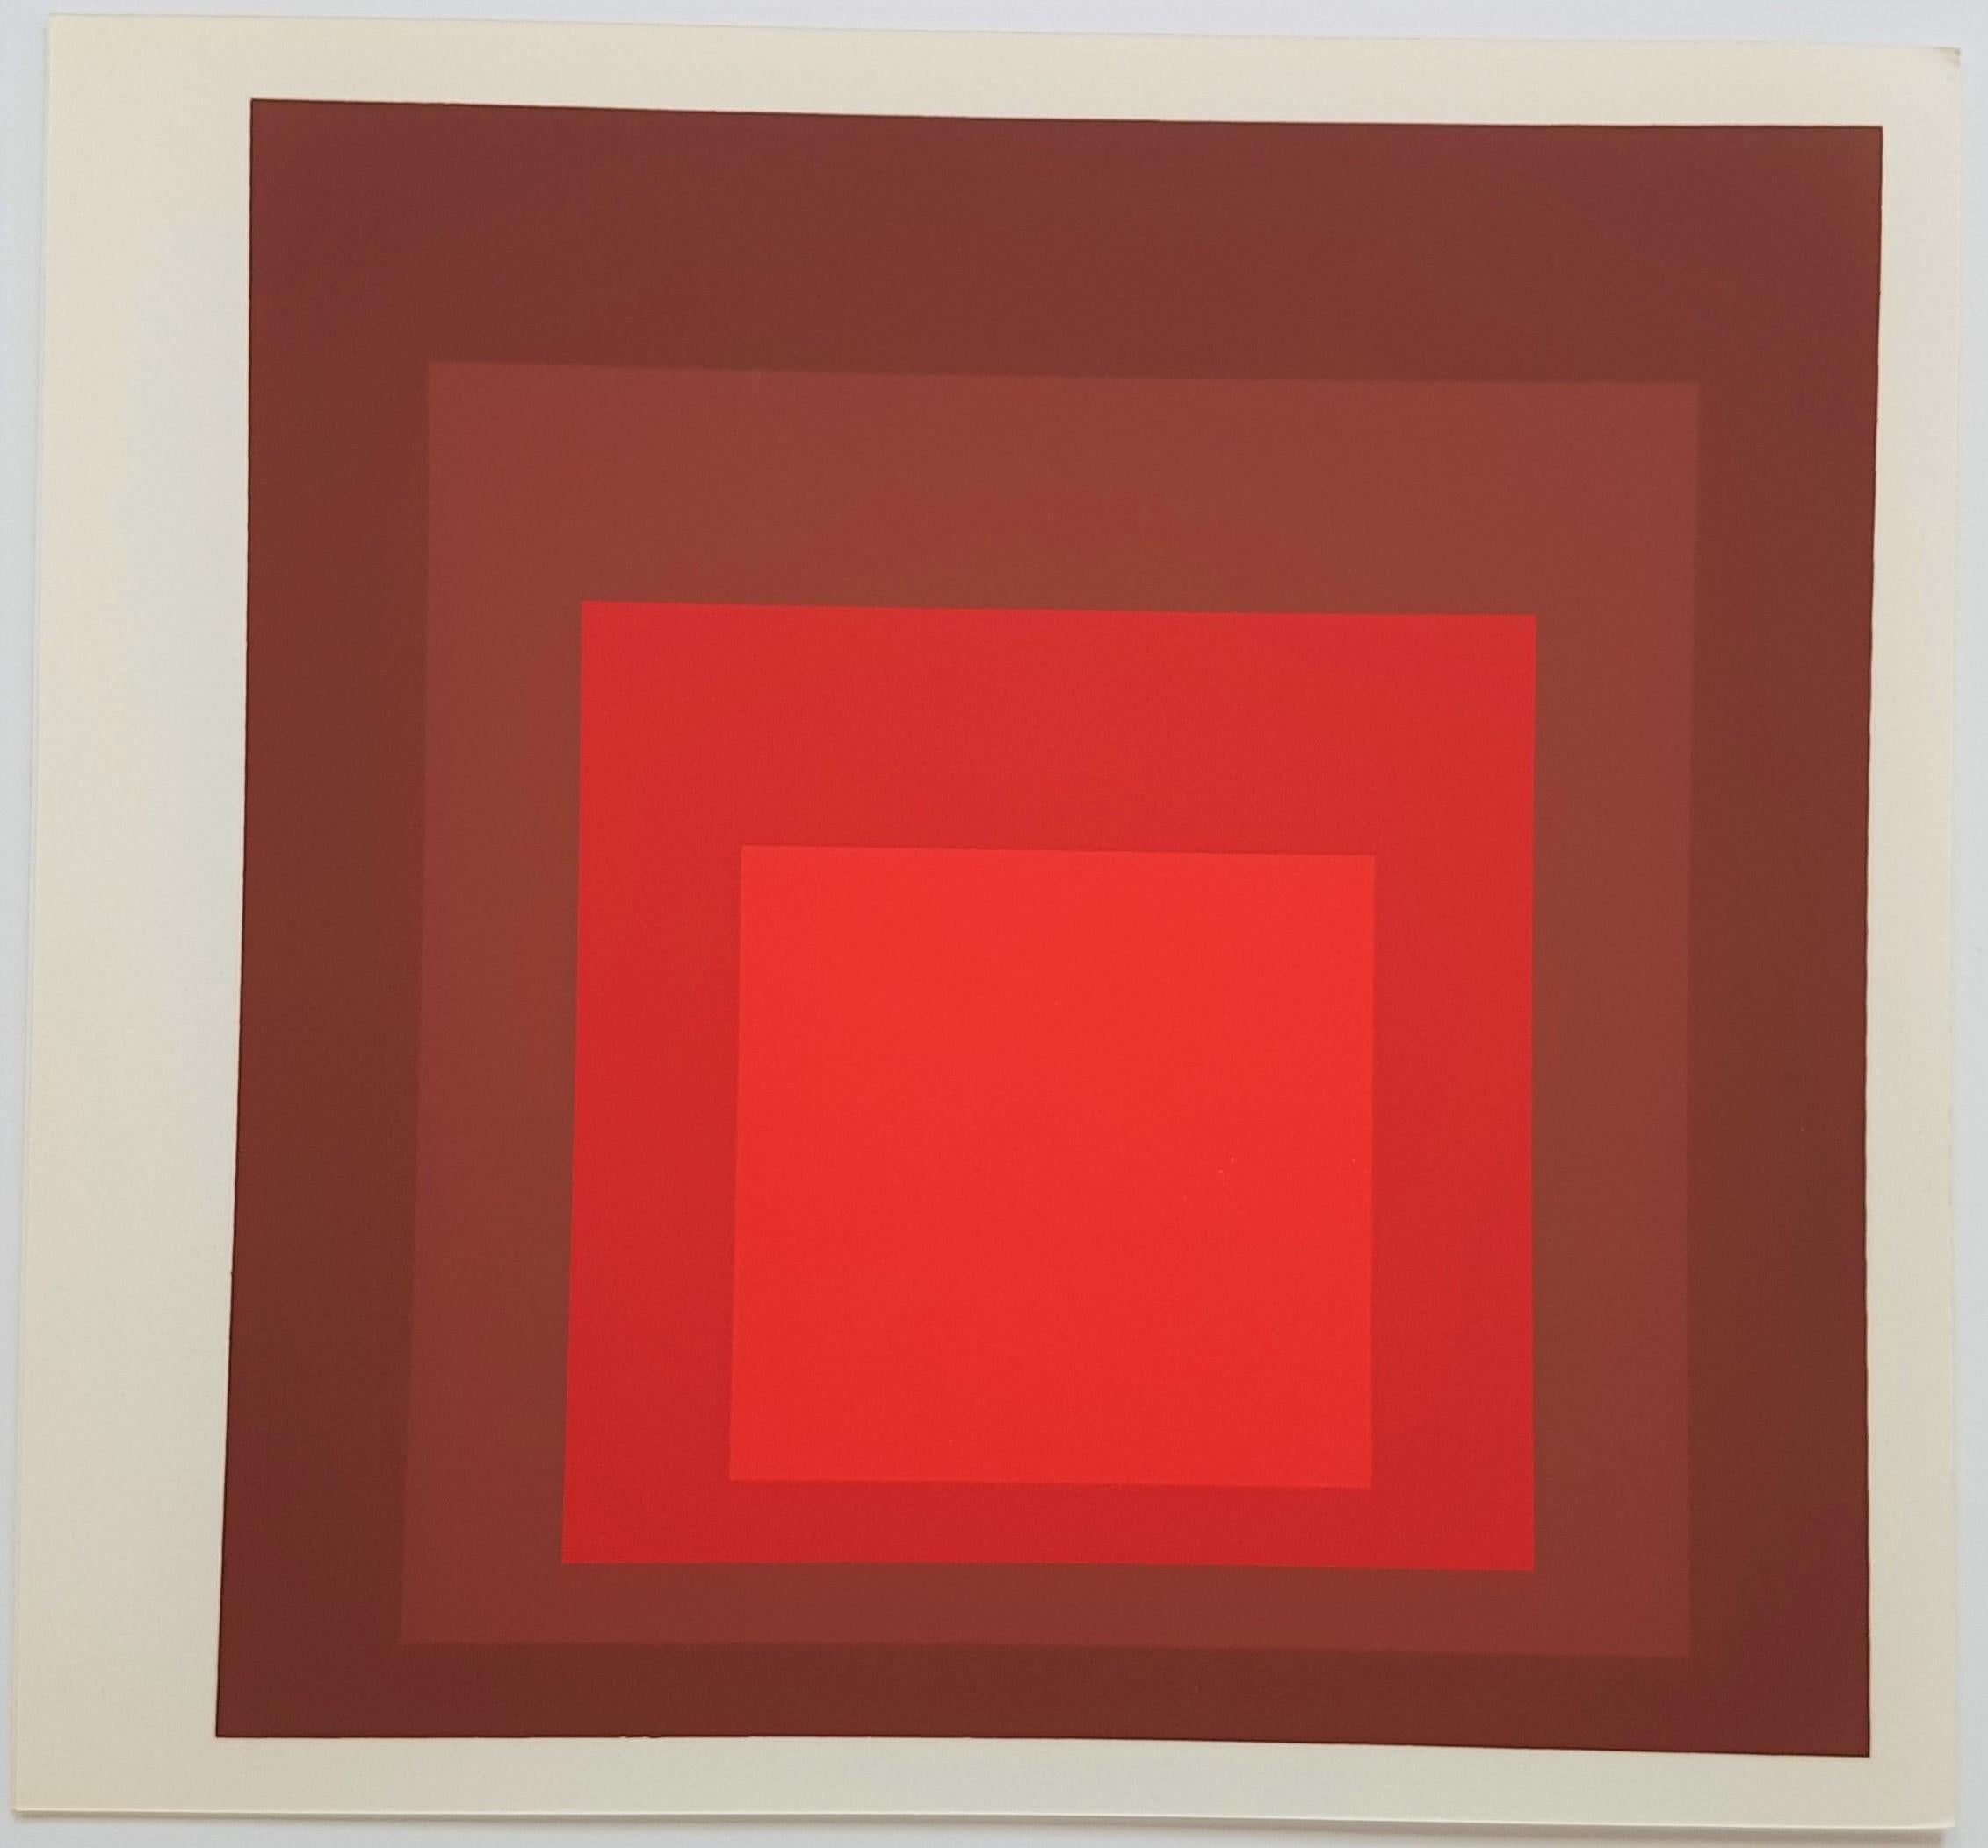 Josef Albers
Homage to the Square
Year: 1977
9 (nine) Silkscreen Prints in brilliant Colors on strong wove paper
Unsigned
Published by Verlag Aurel Bongers KG, Recklinghausen, Germany
Serigraphs by Trautwein KG, Recklinghausen, Germany
Edition: